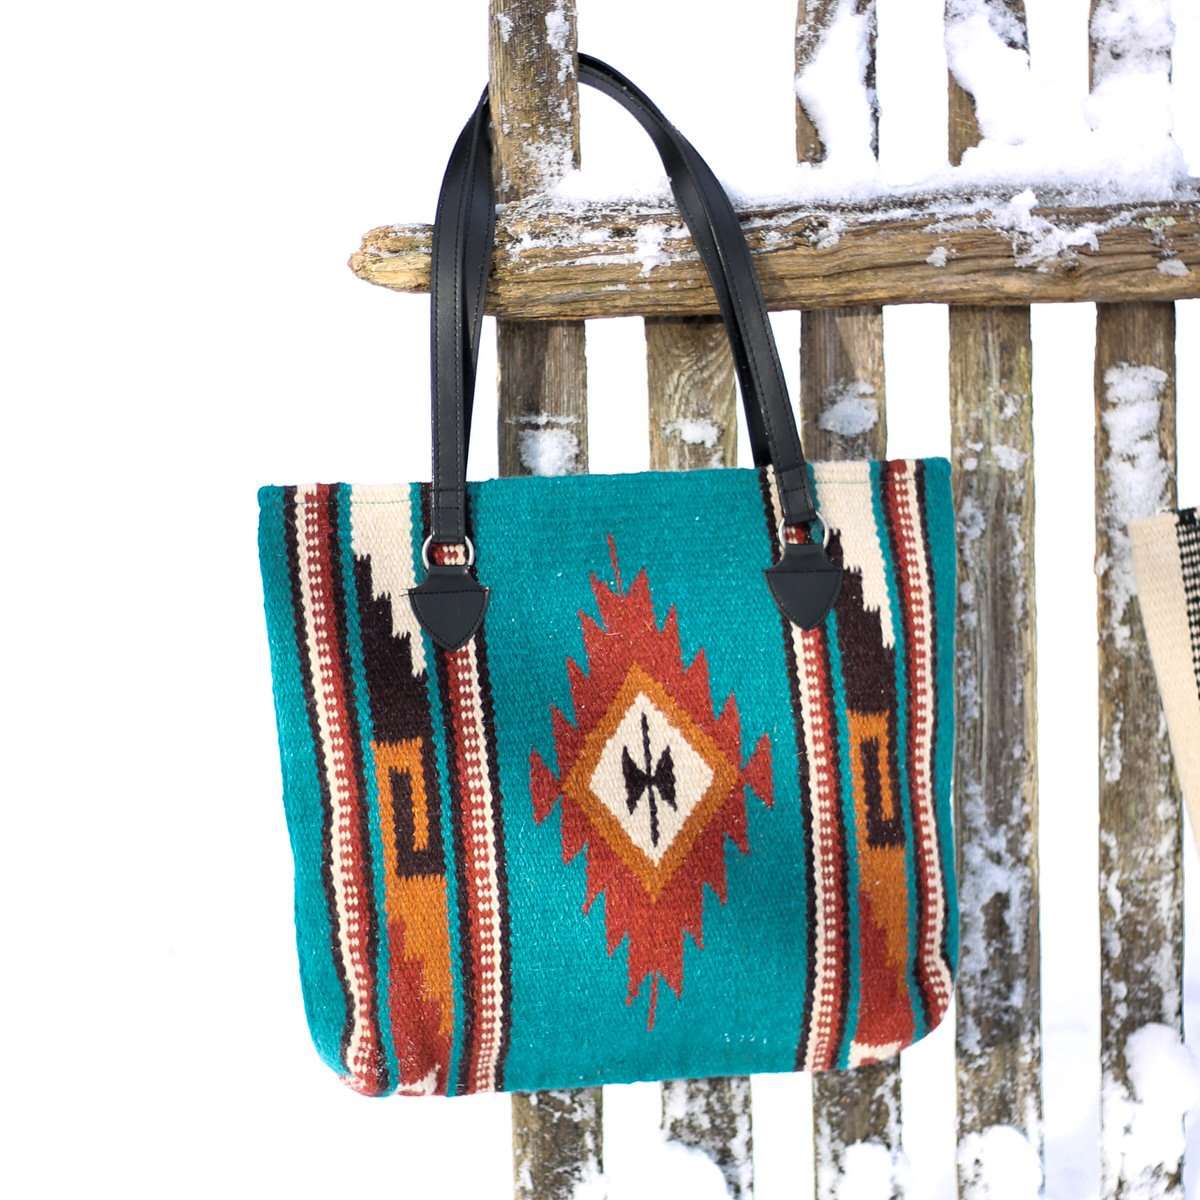 Handwoven wool handbag with center diamond design in turquoise and rust with black, cream and tan accents and black straps hanging from snow covered wood fence.